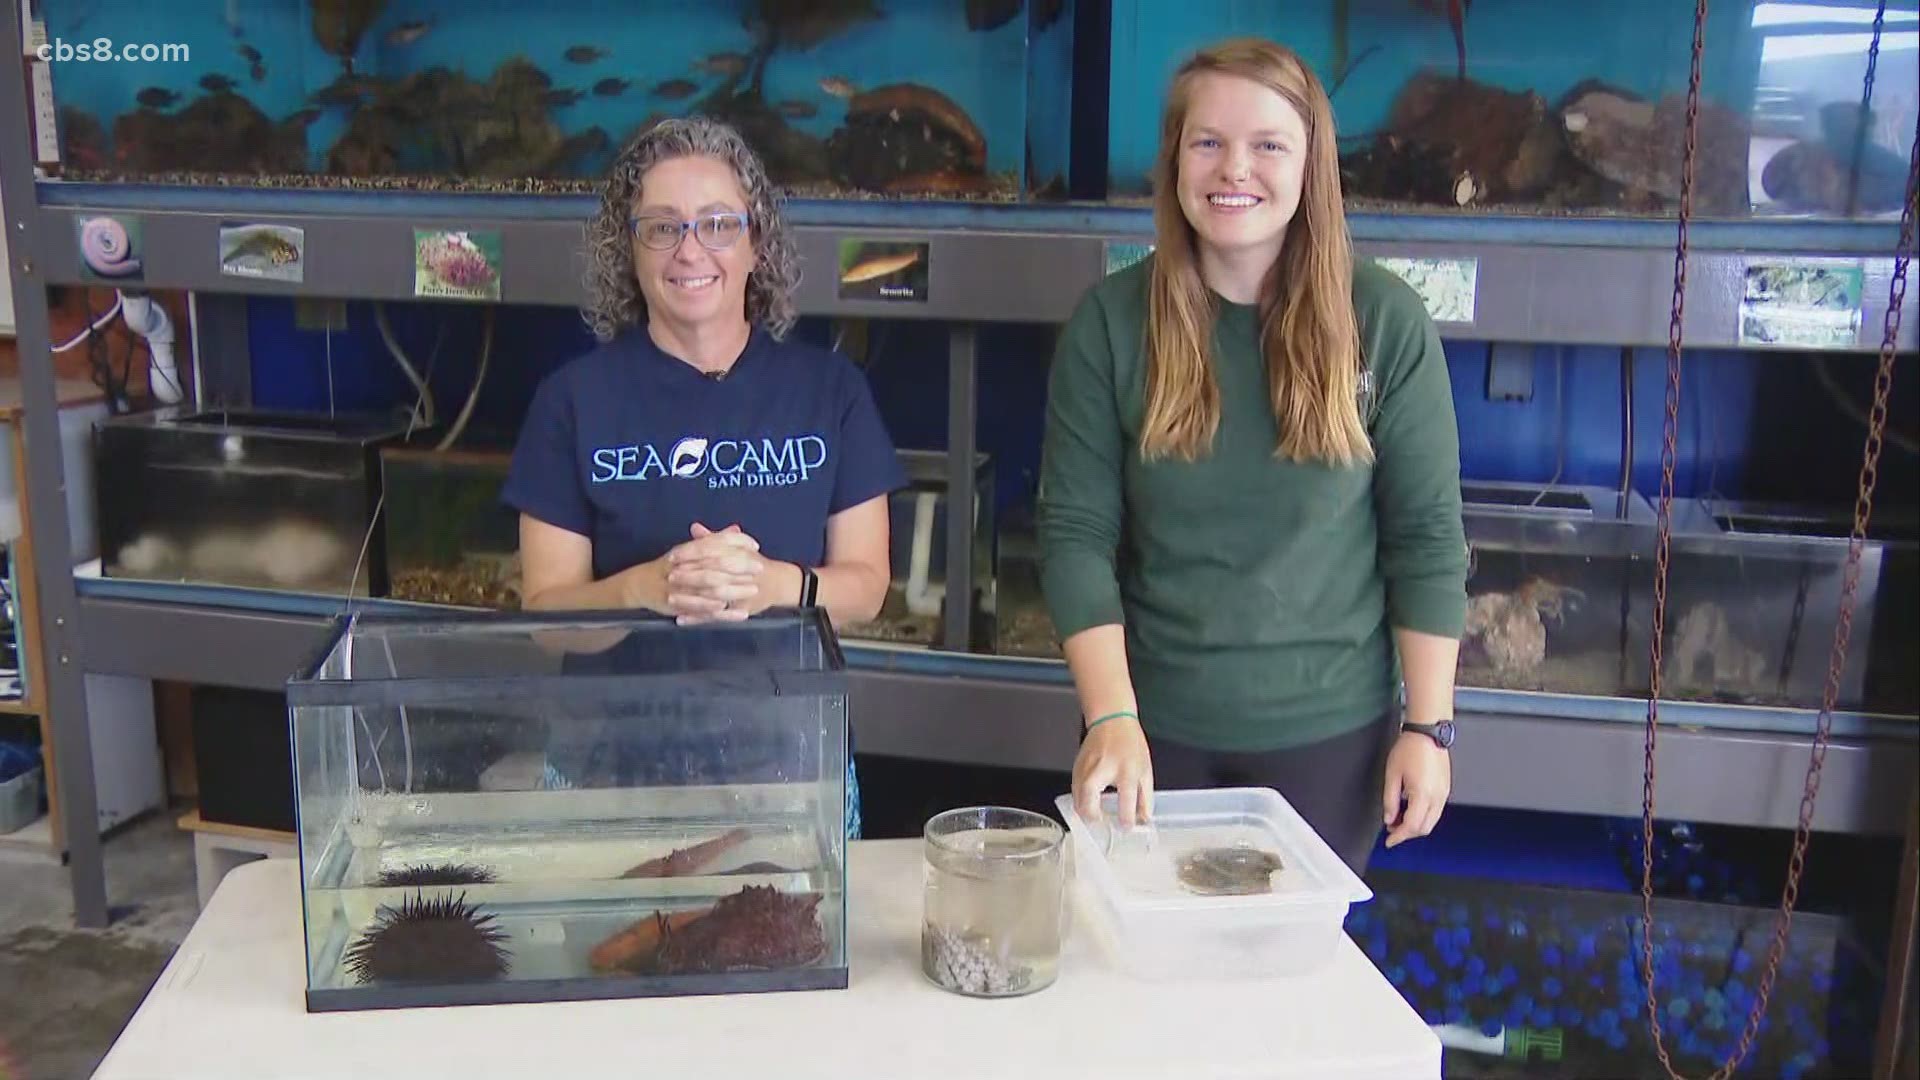 Amy Zerofski and Laura joined Morning Extra to show off some cool animals and to talk about the many different camp opportunities that are offered.